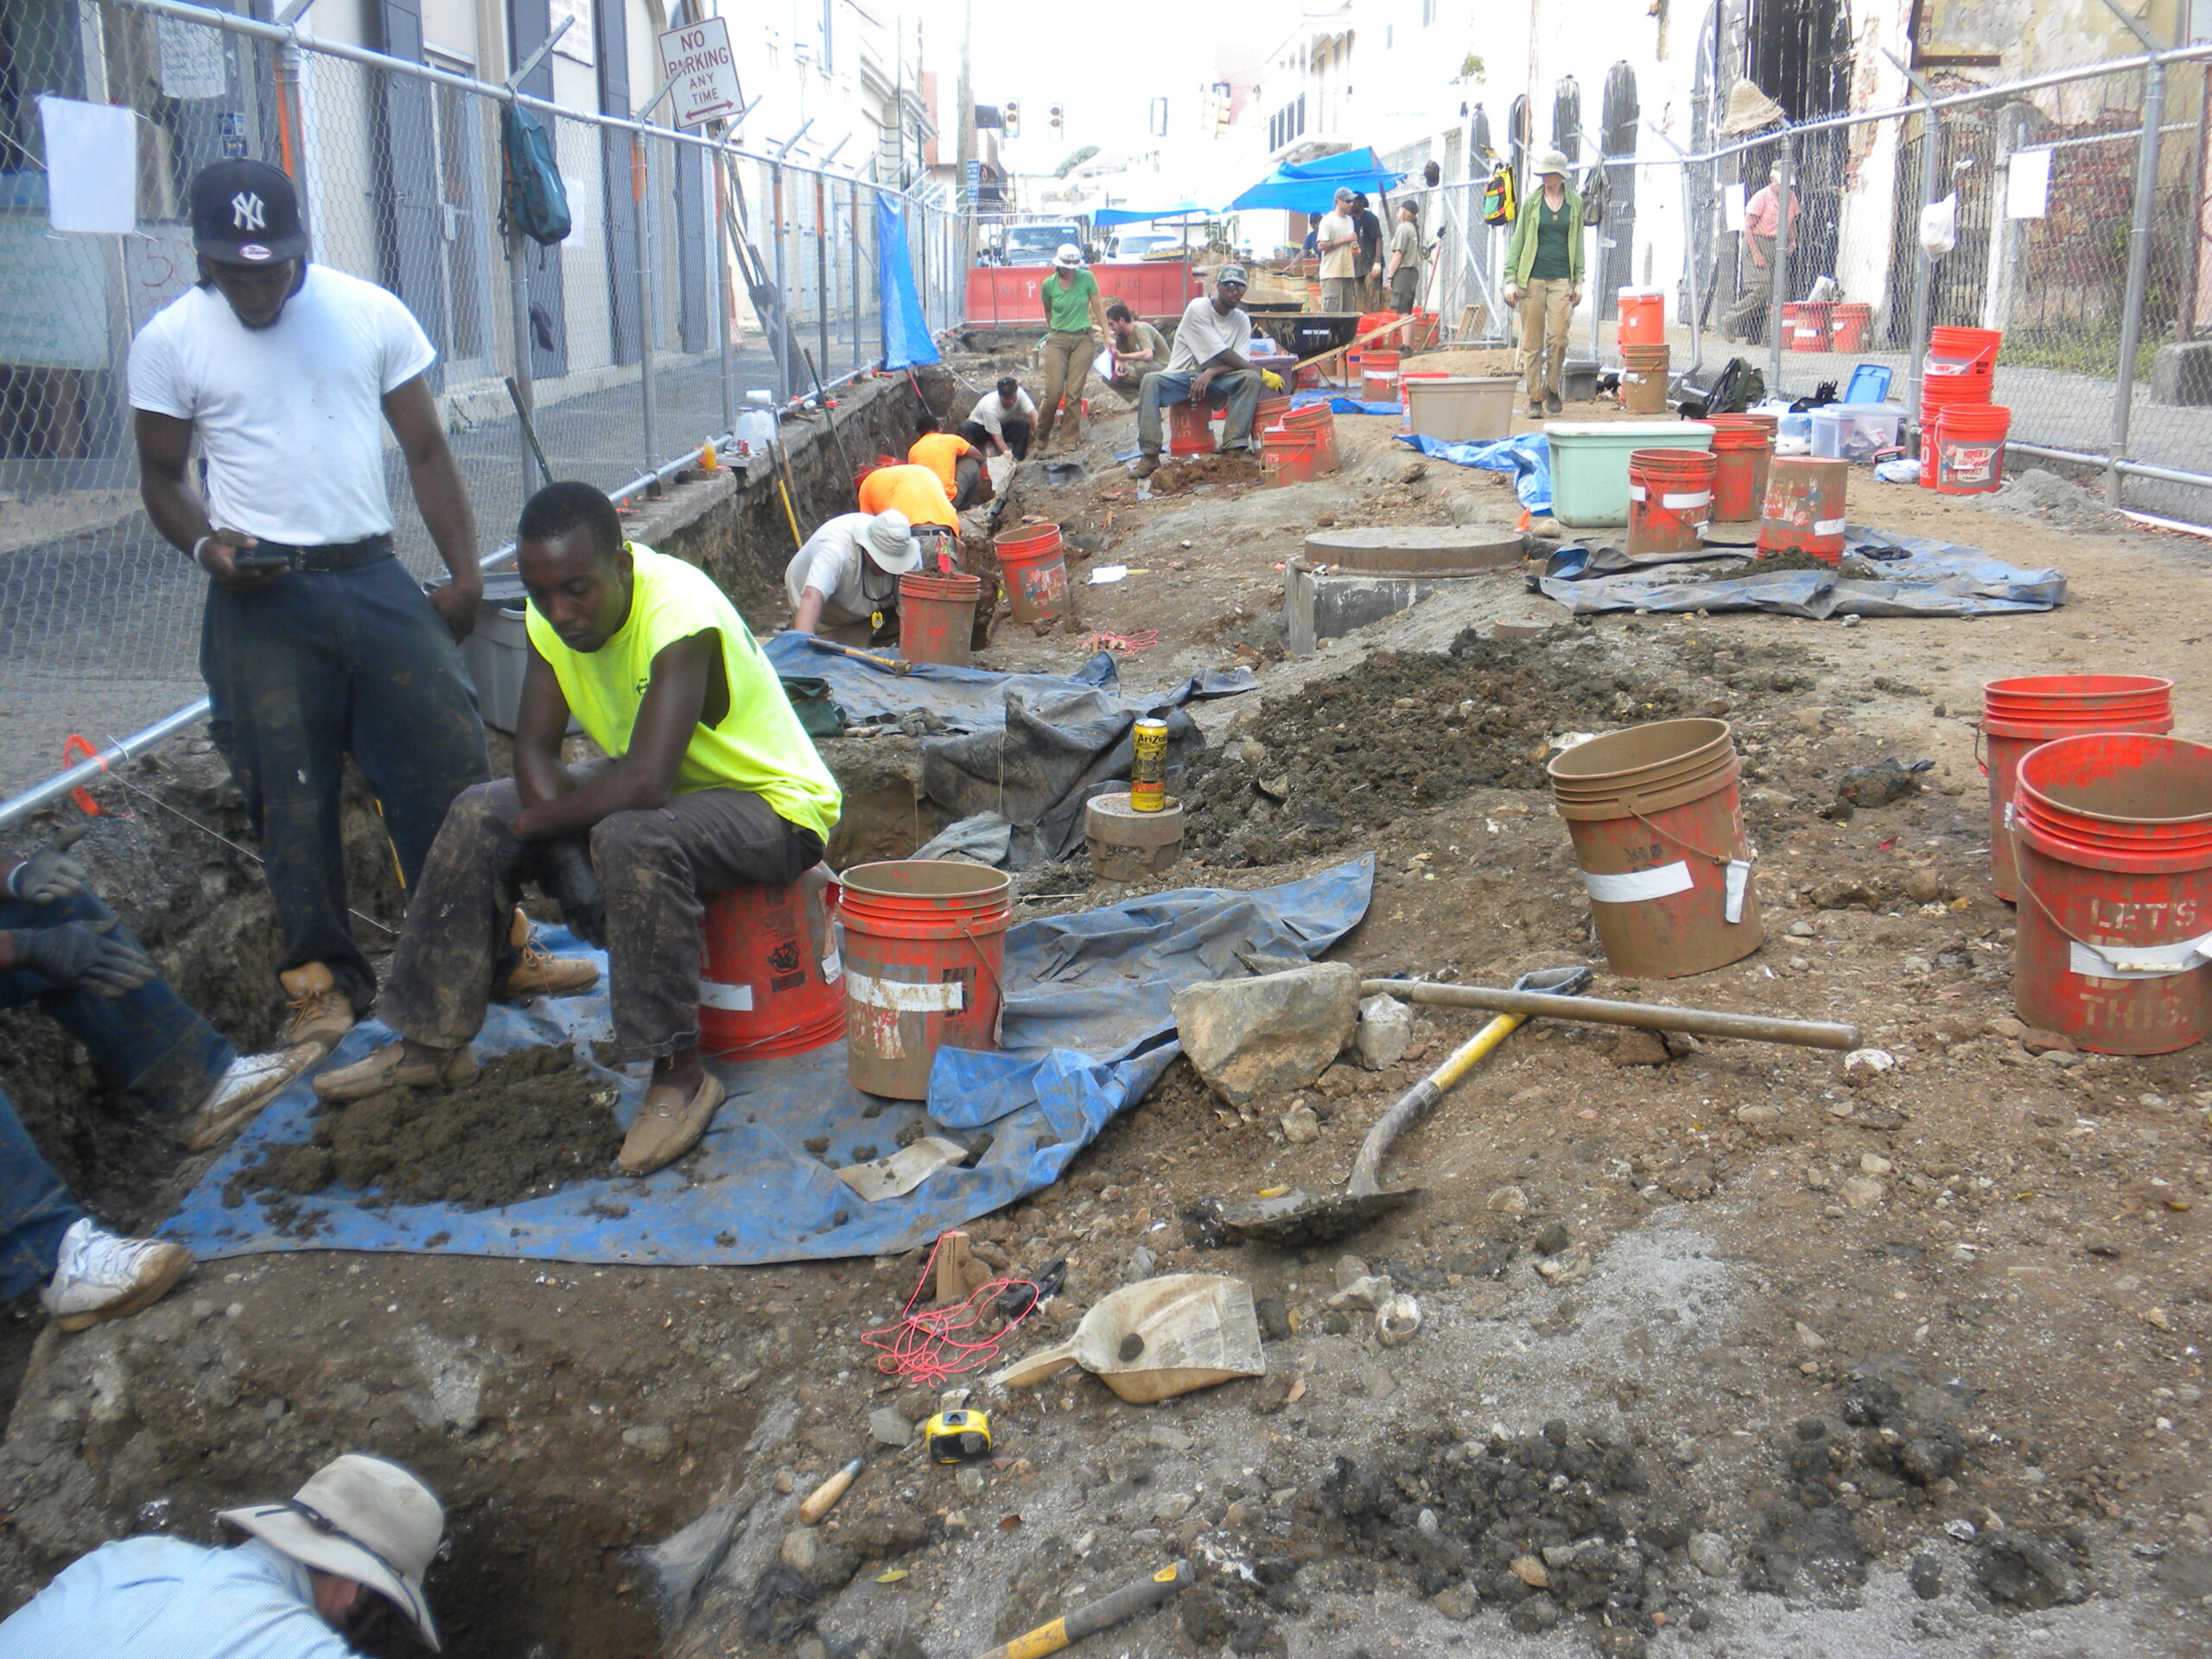 Workers sift through the dirt below Main Street in 2014 on St. Thomas. (Photo by Emily Lundberg)